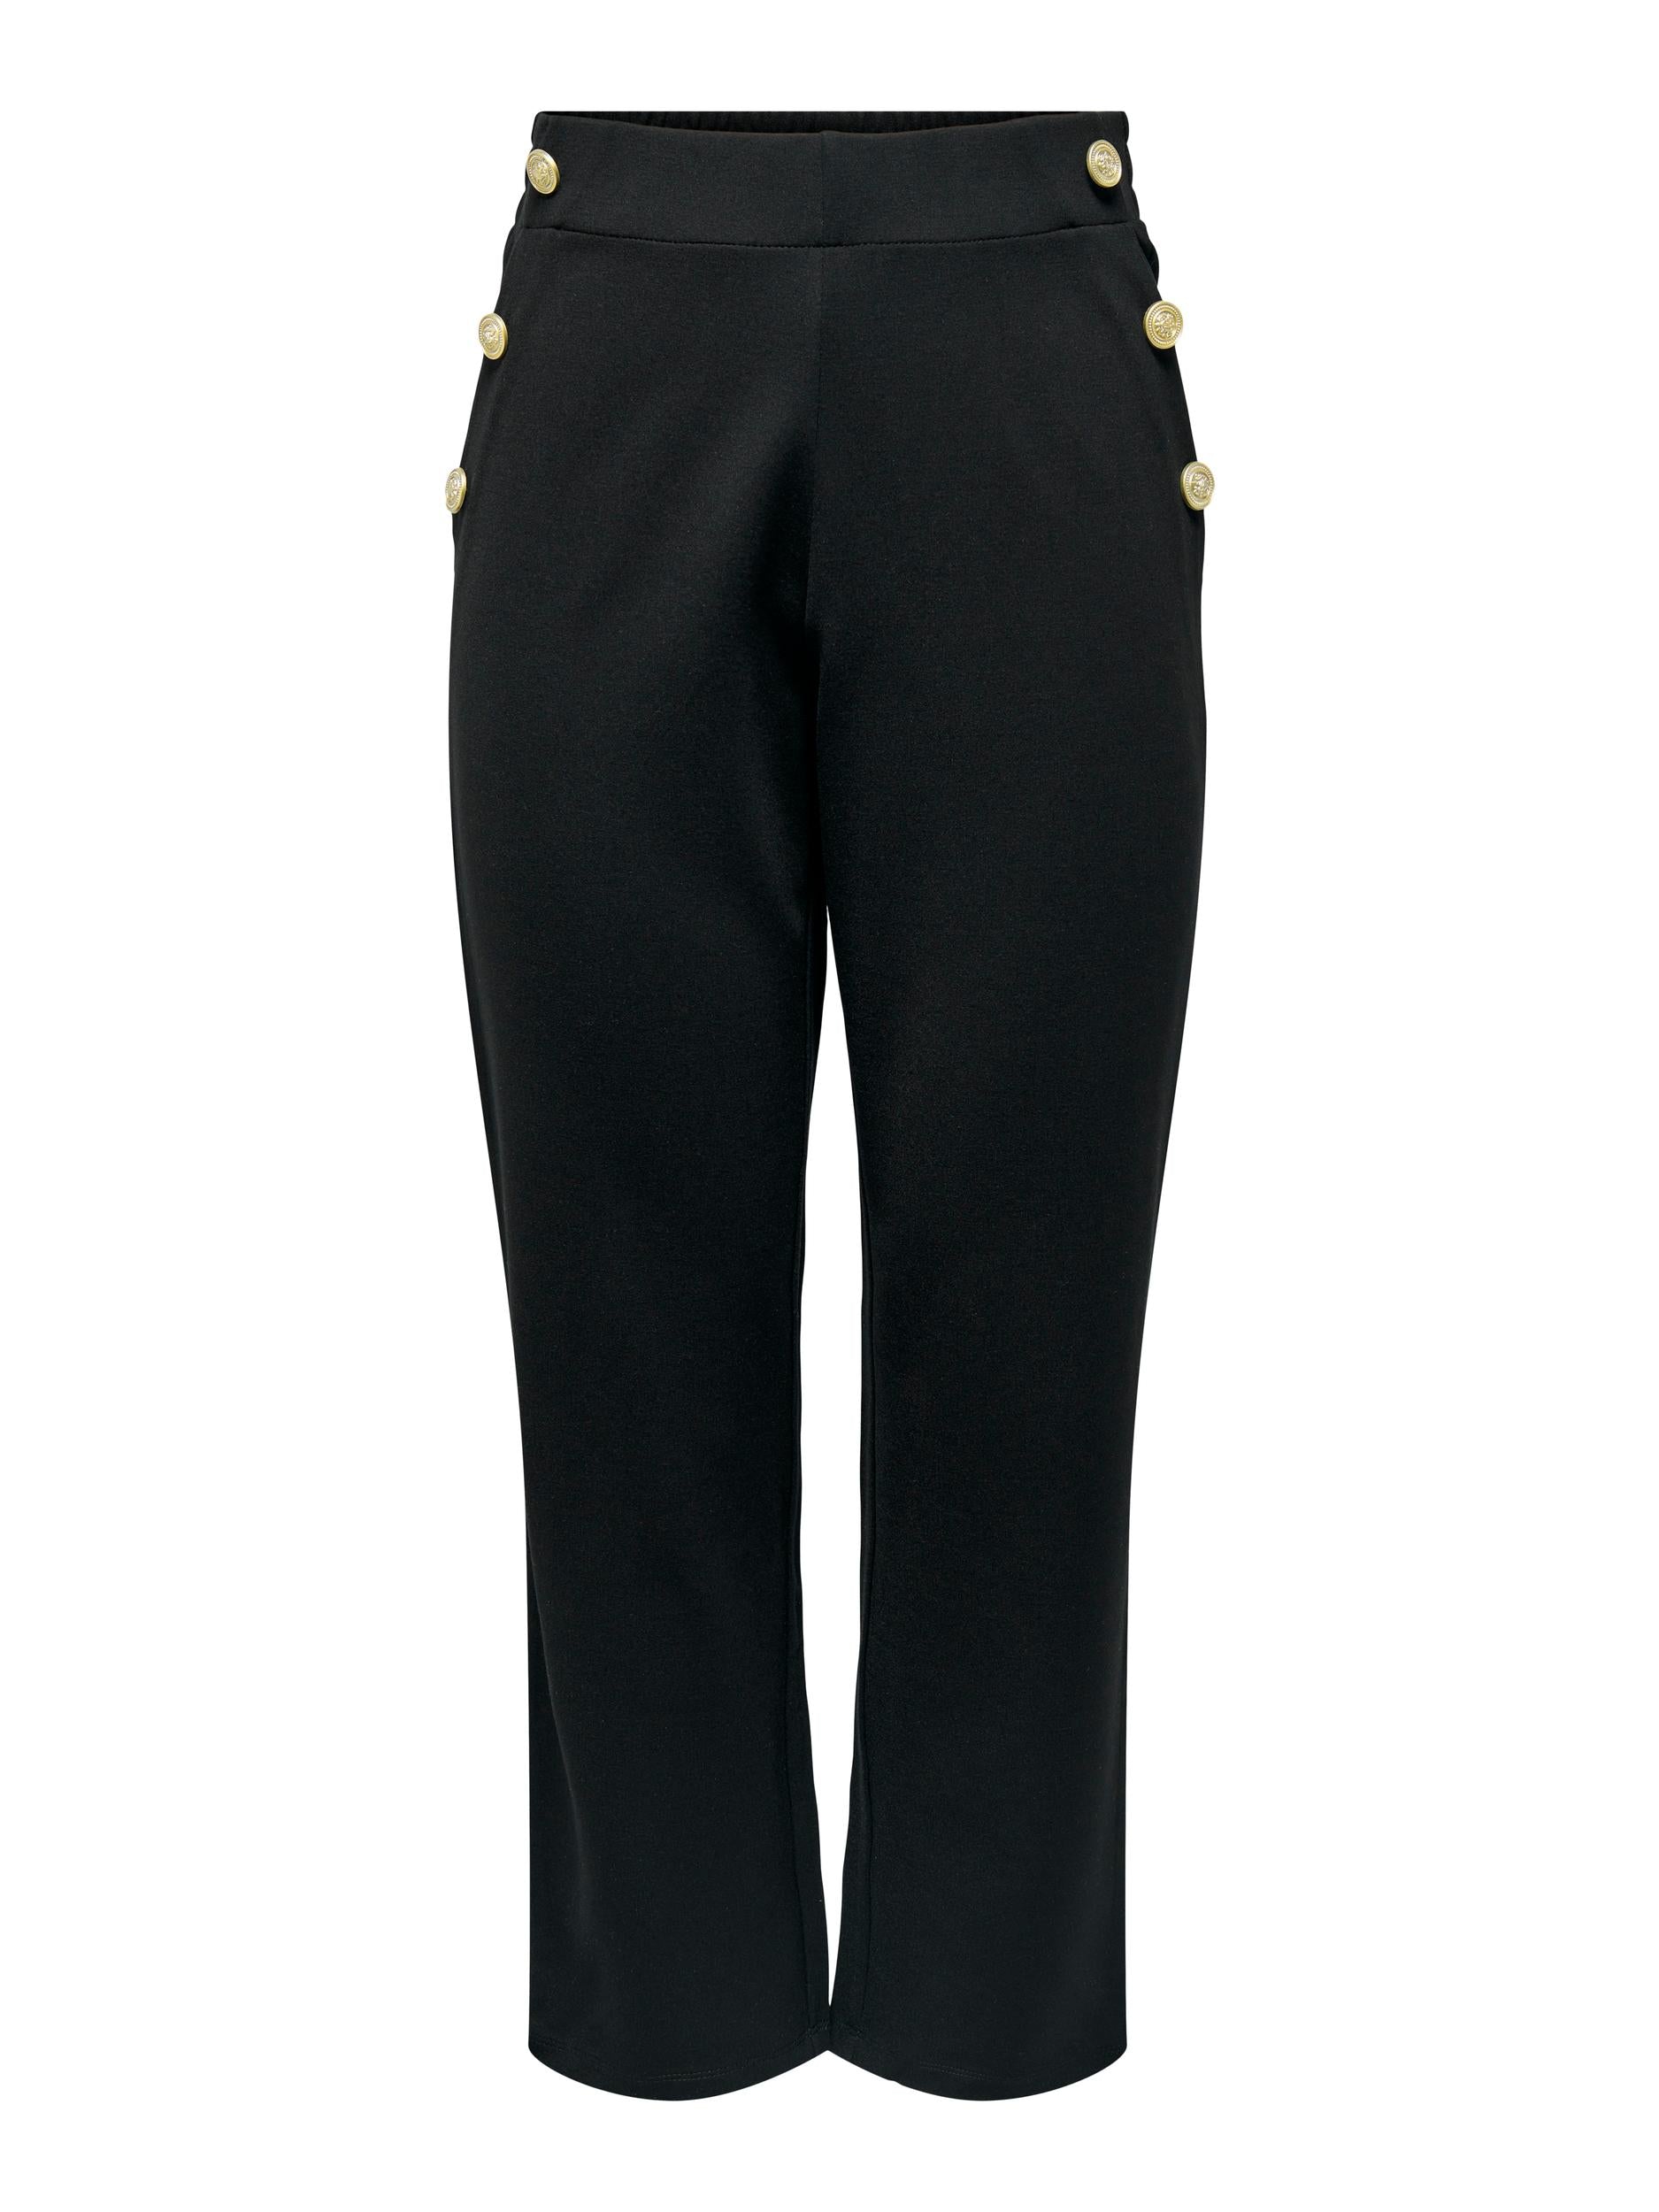 Ladies Cally Button Ancle Pant-Black-Front View